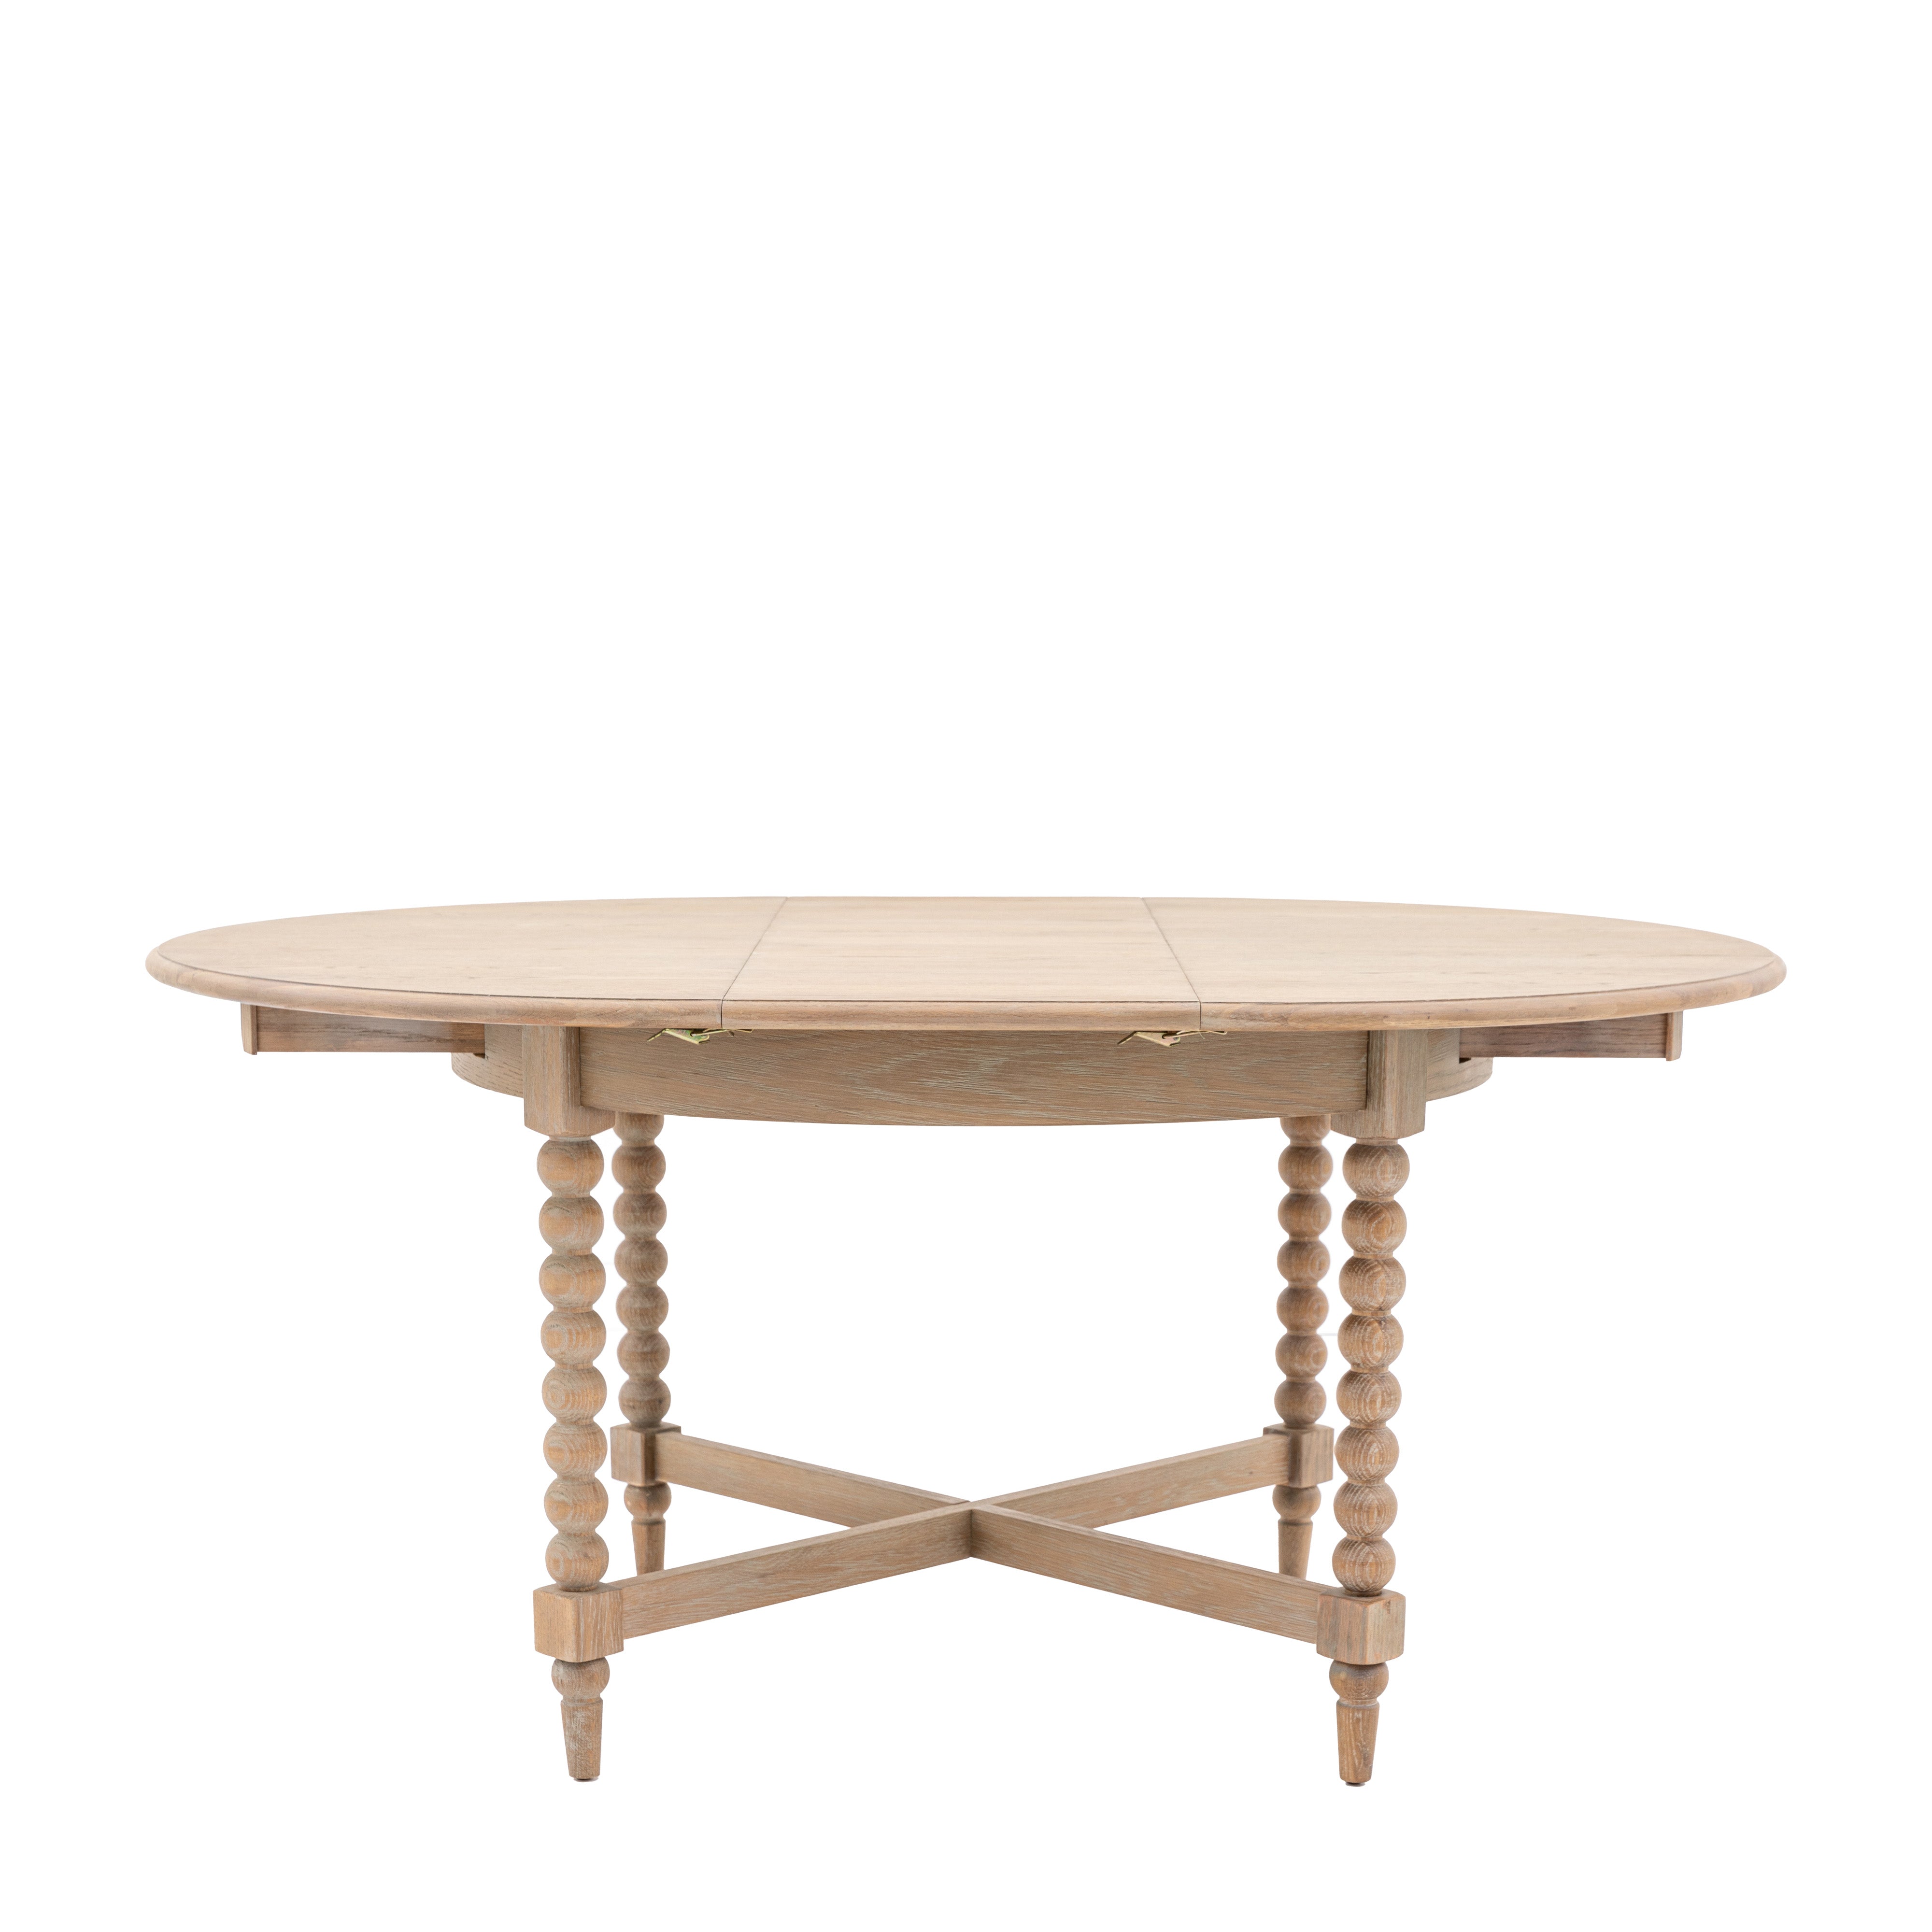 Artisa Round Extendable Dining Table